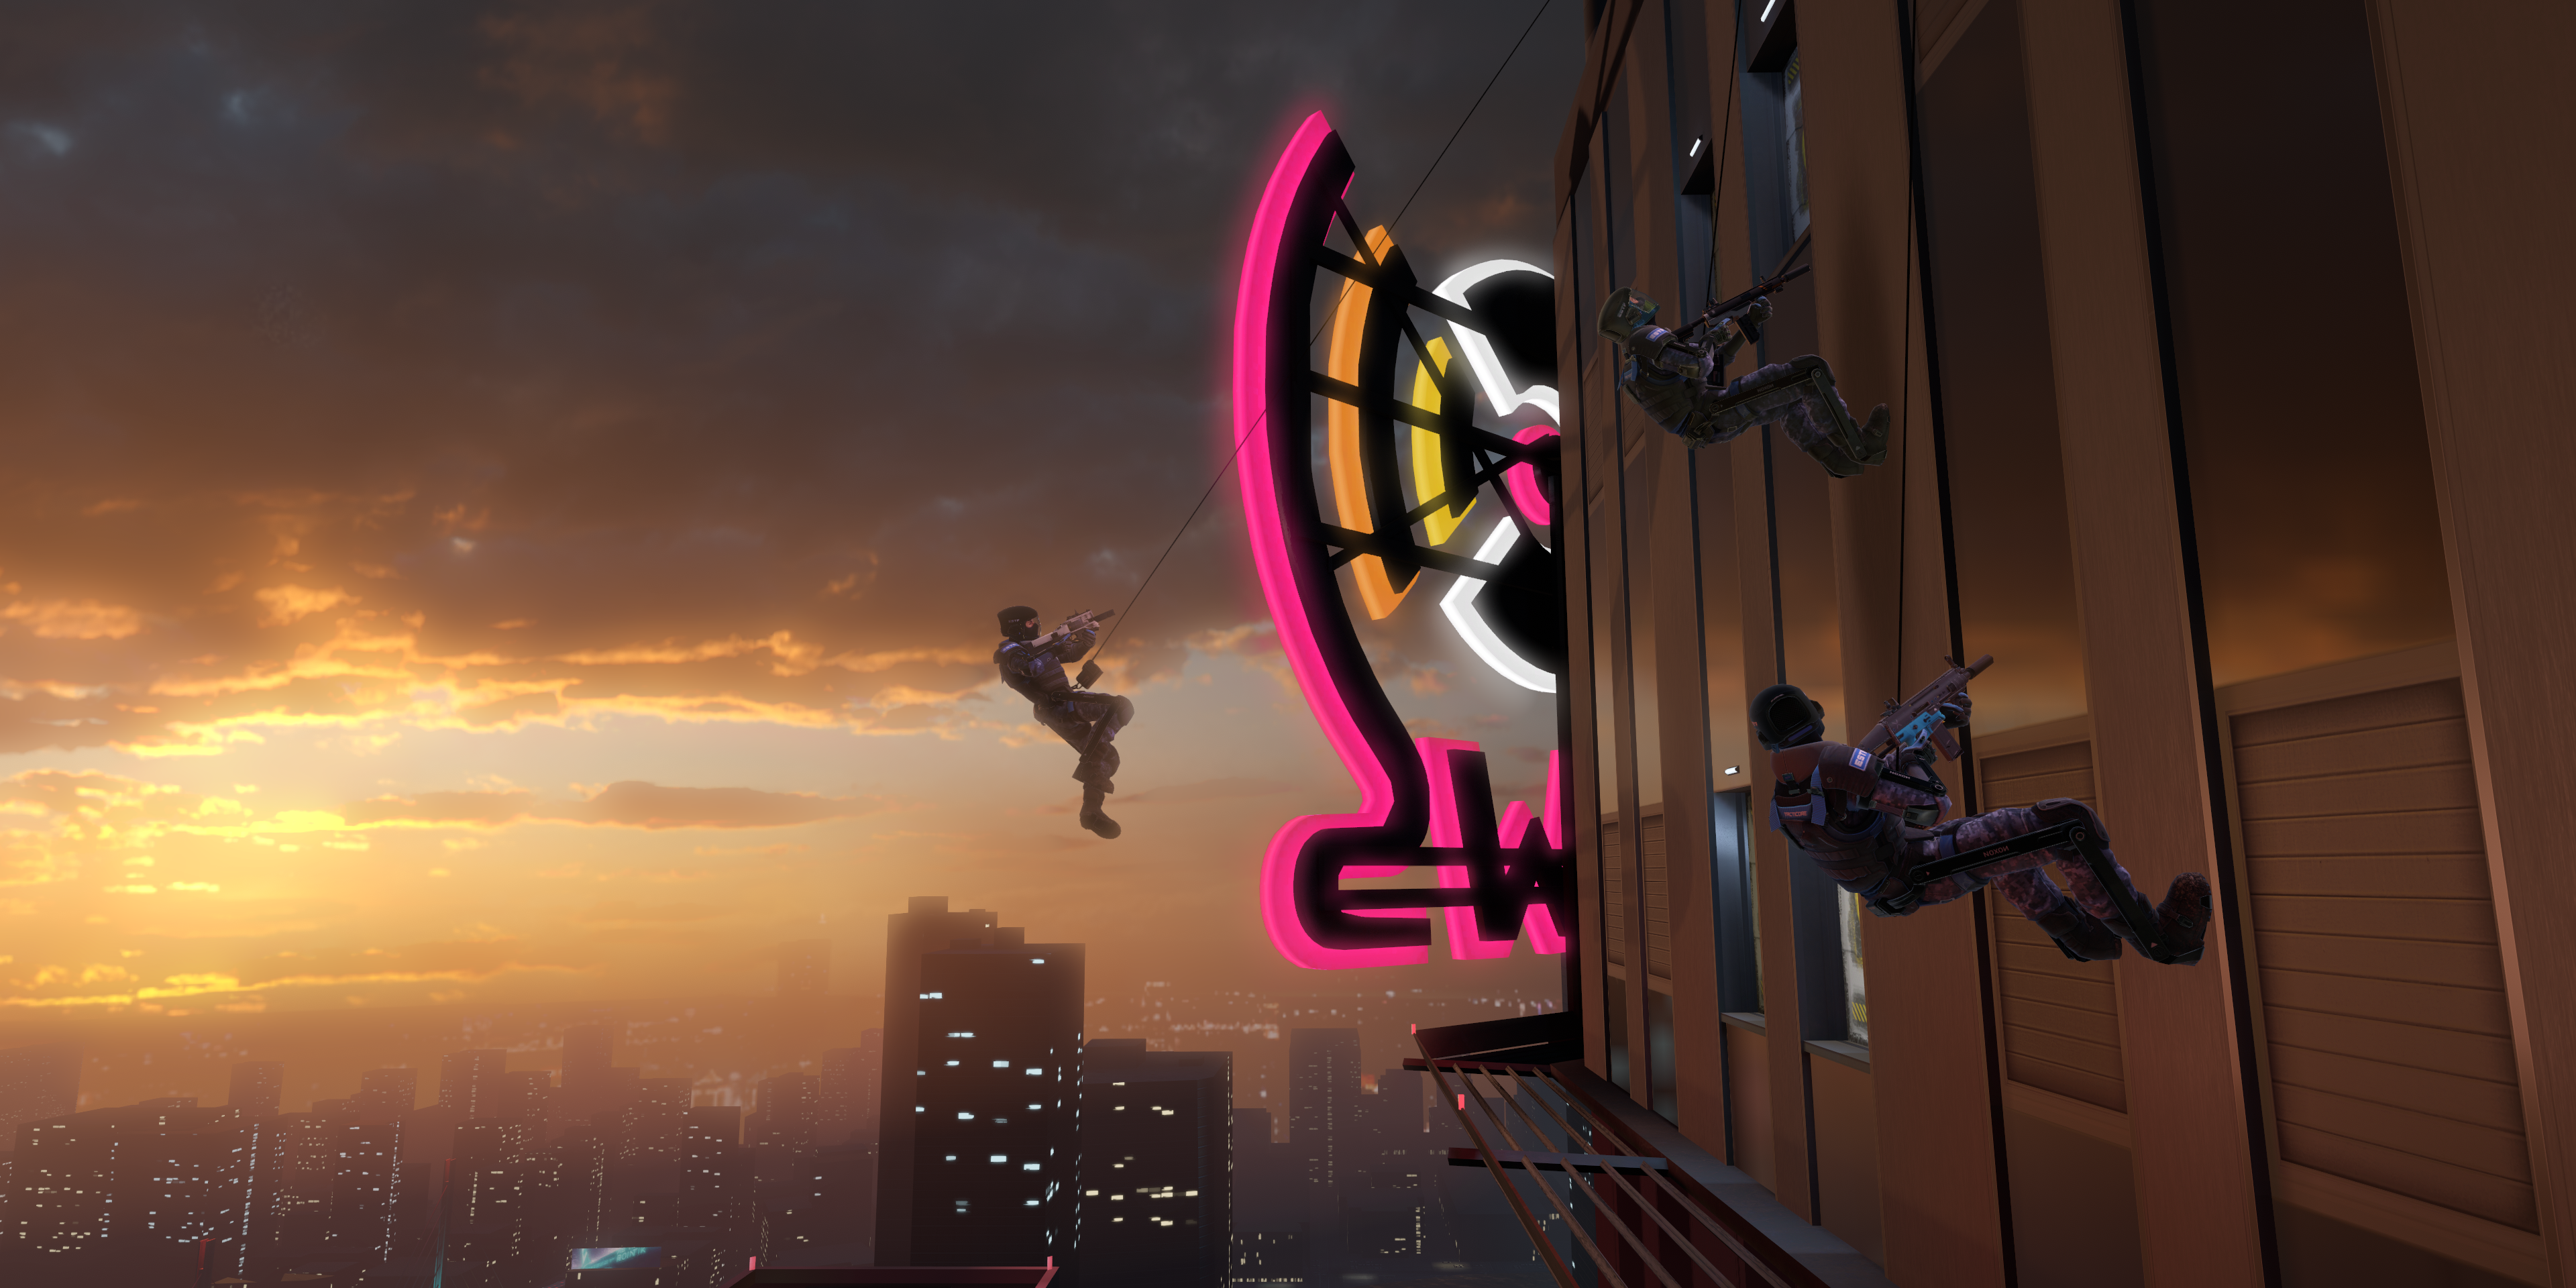 Players rappel down a building in the video game Breachers, by Triangle Factory